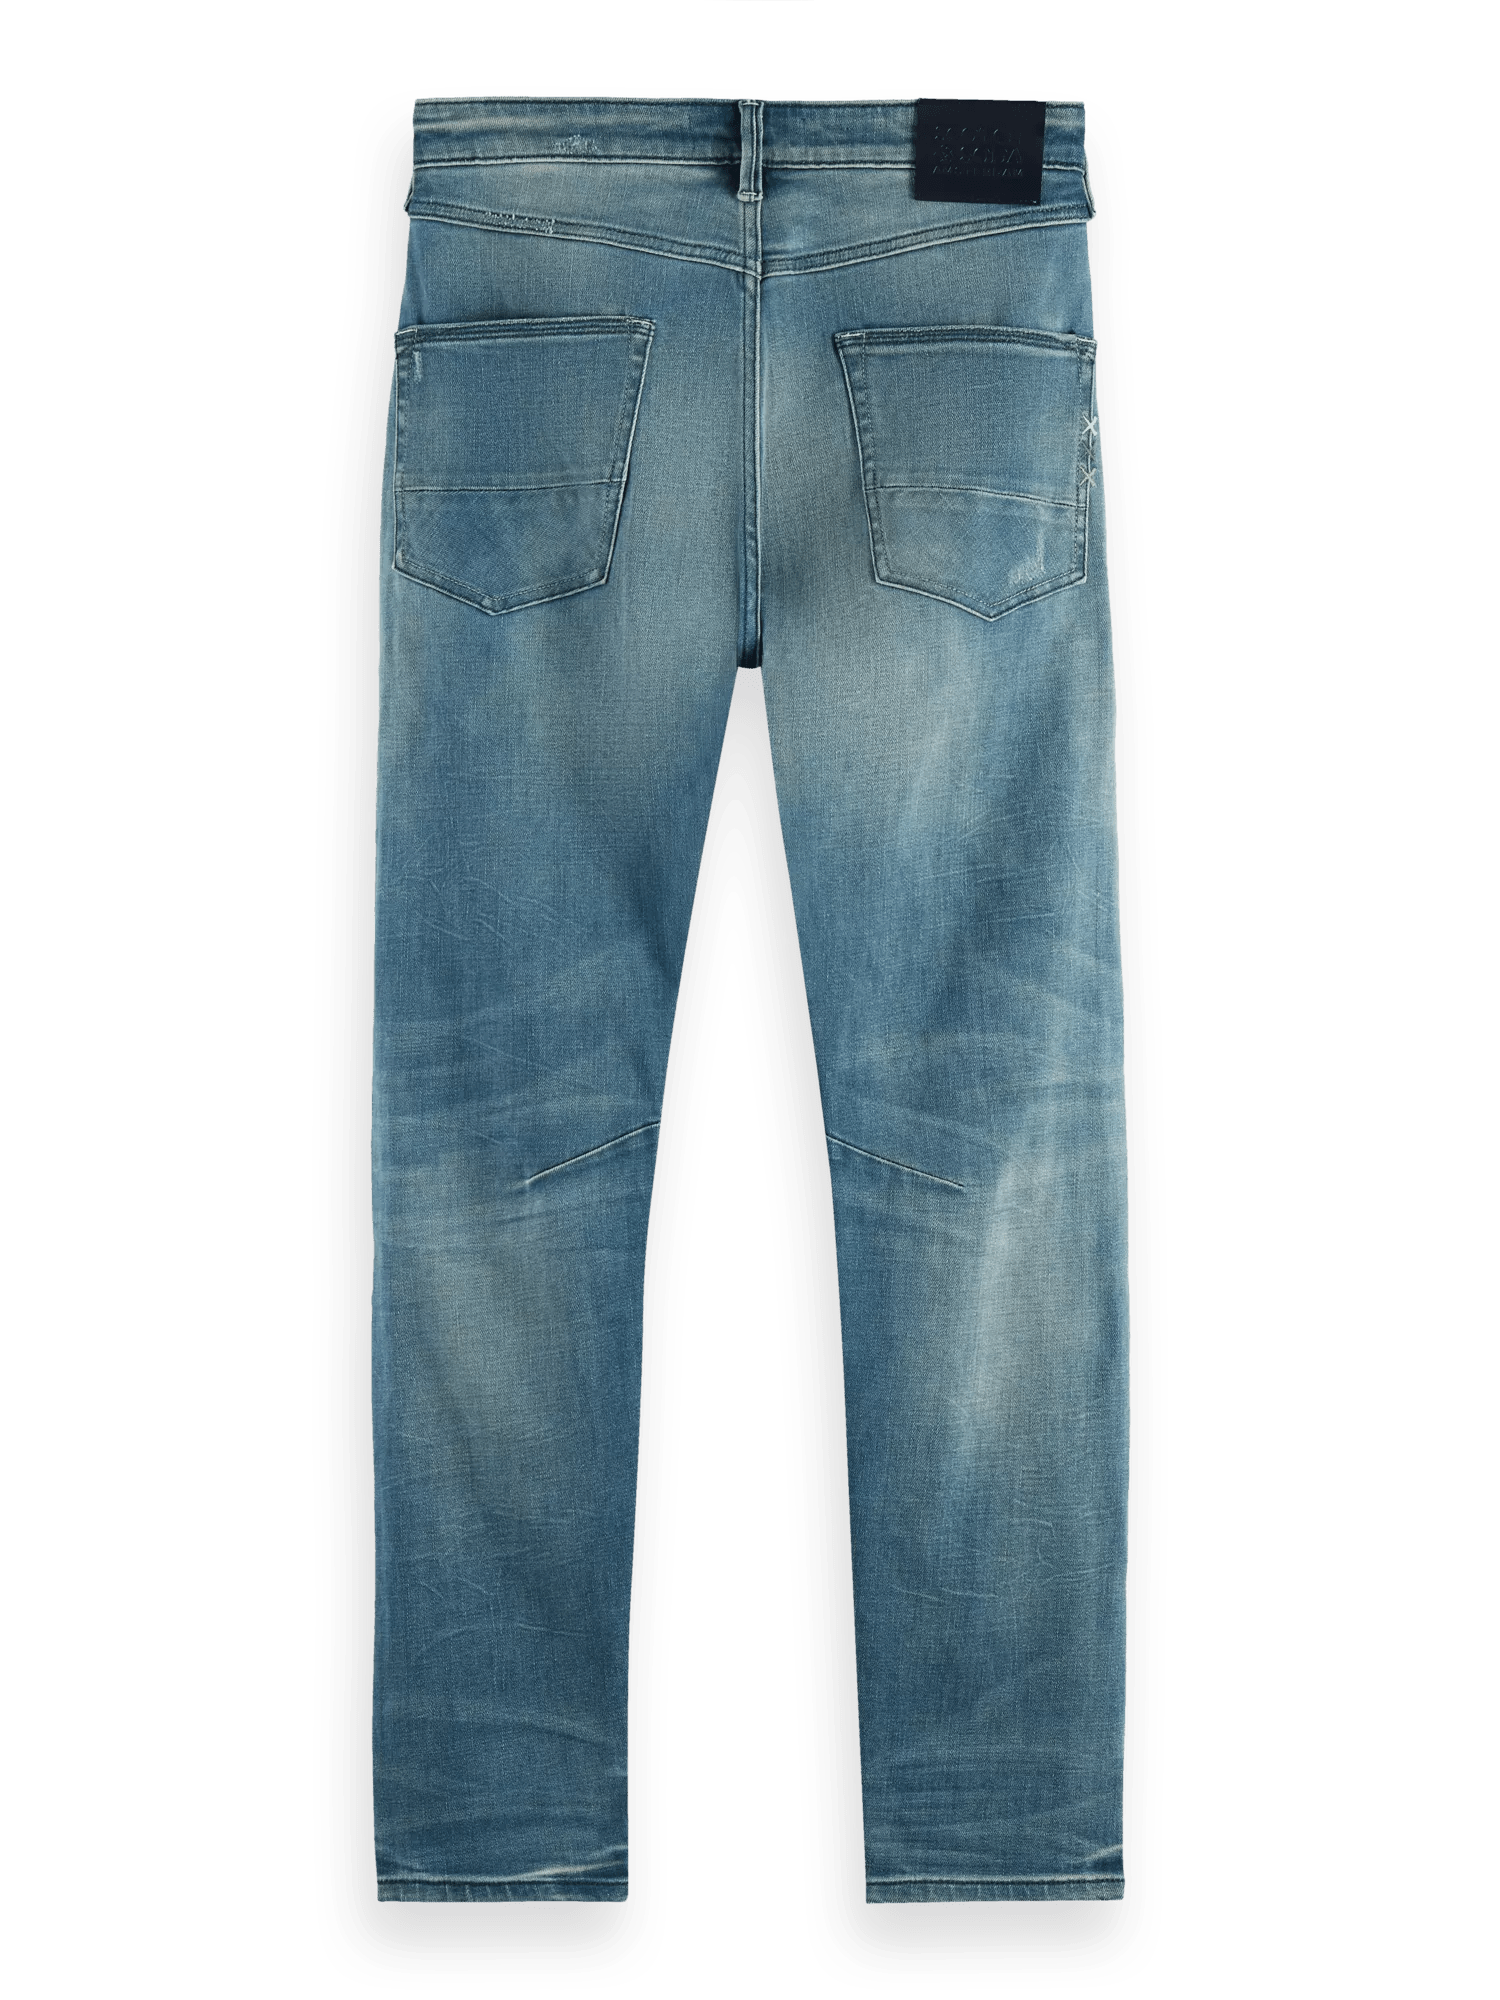 Scotch & Soda The Singel Slim Tapered Fit Jeans – Faded Blue BCK